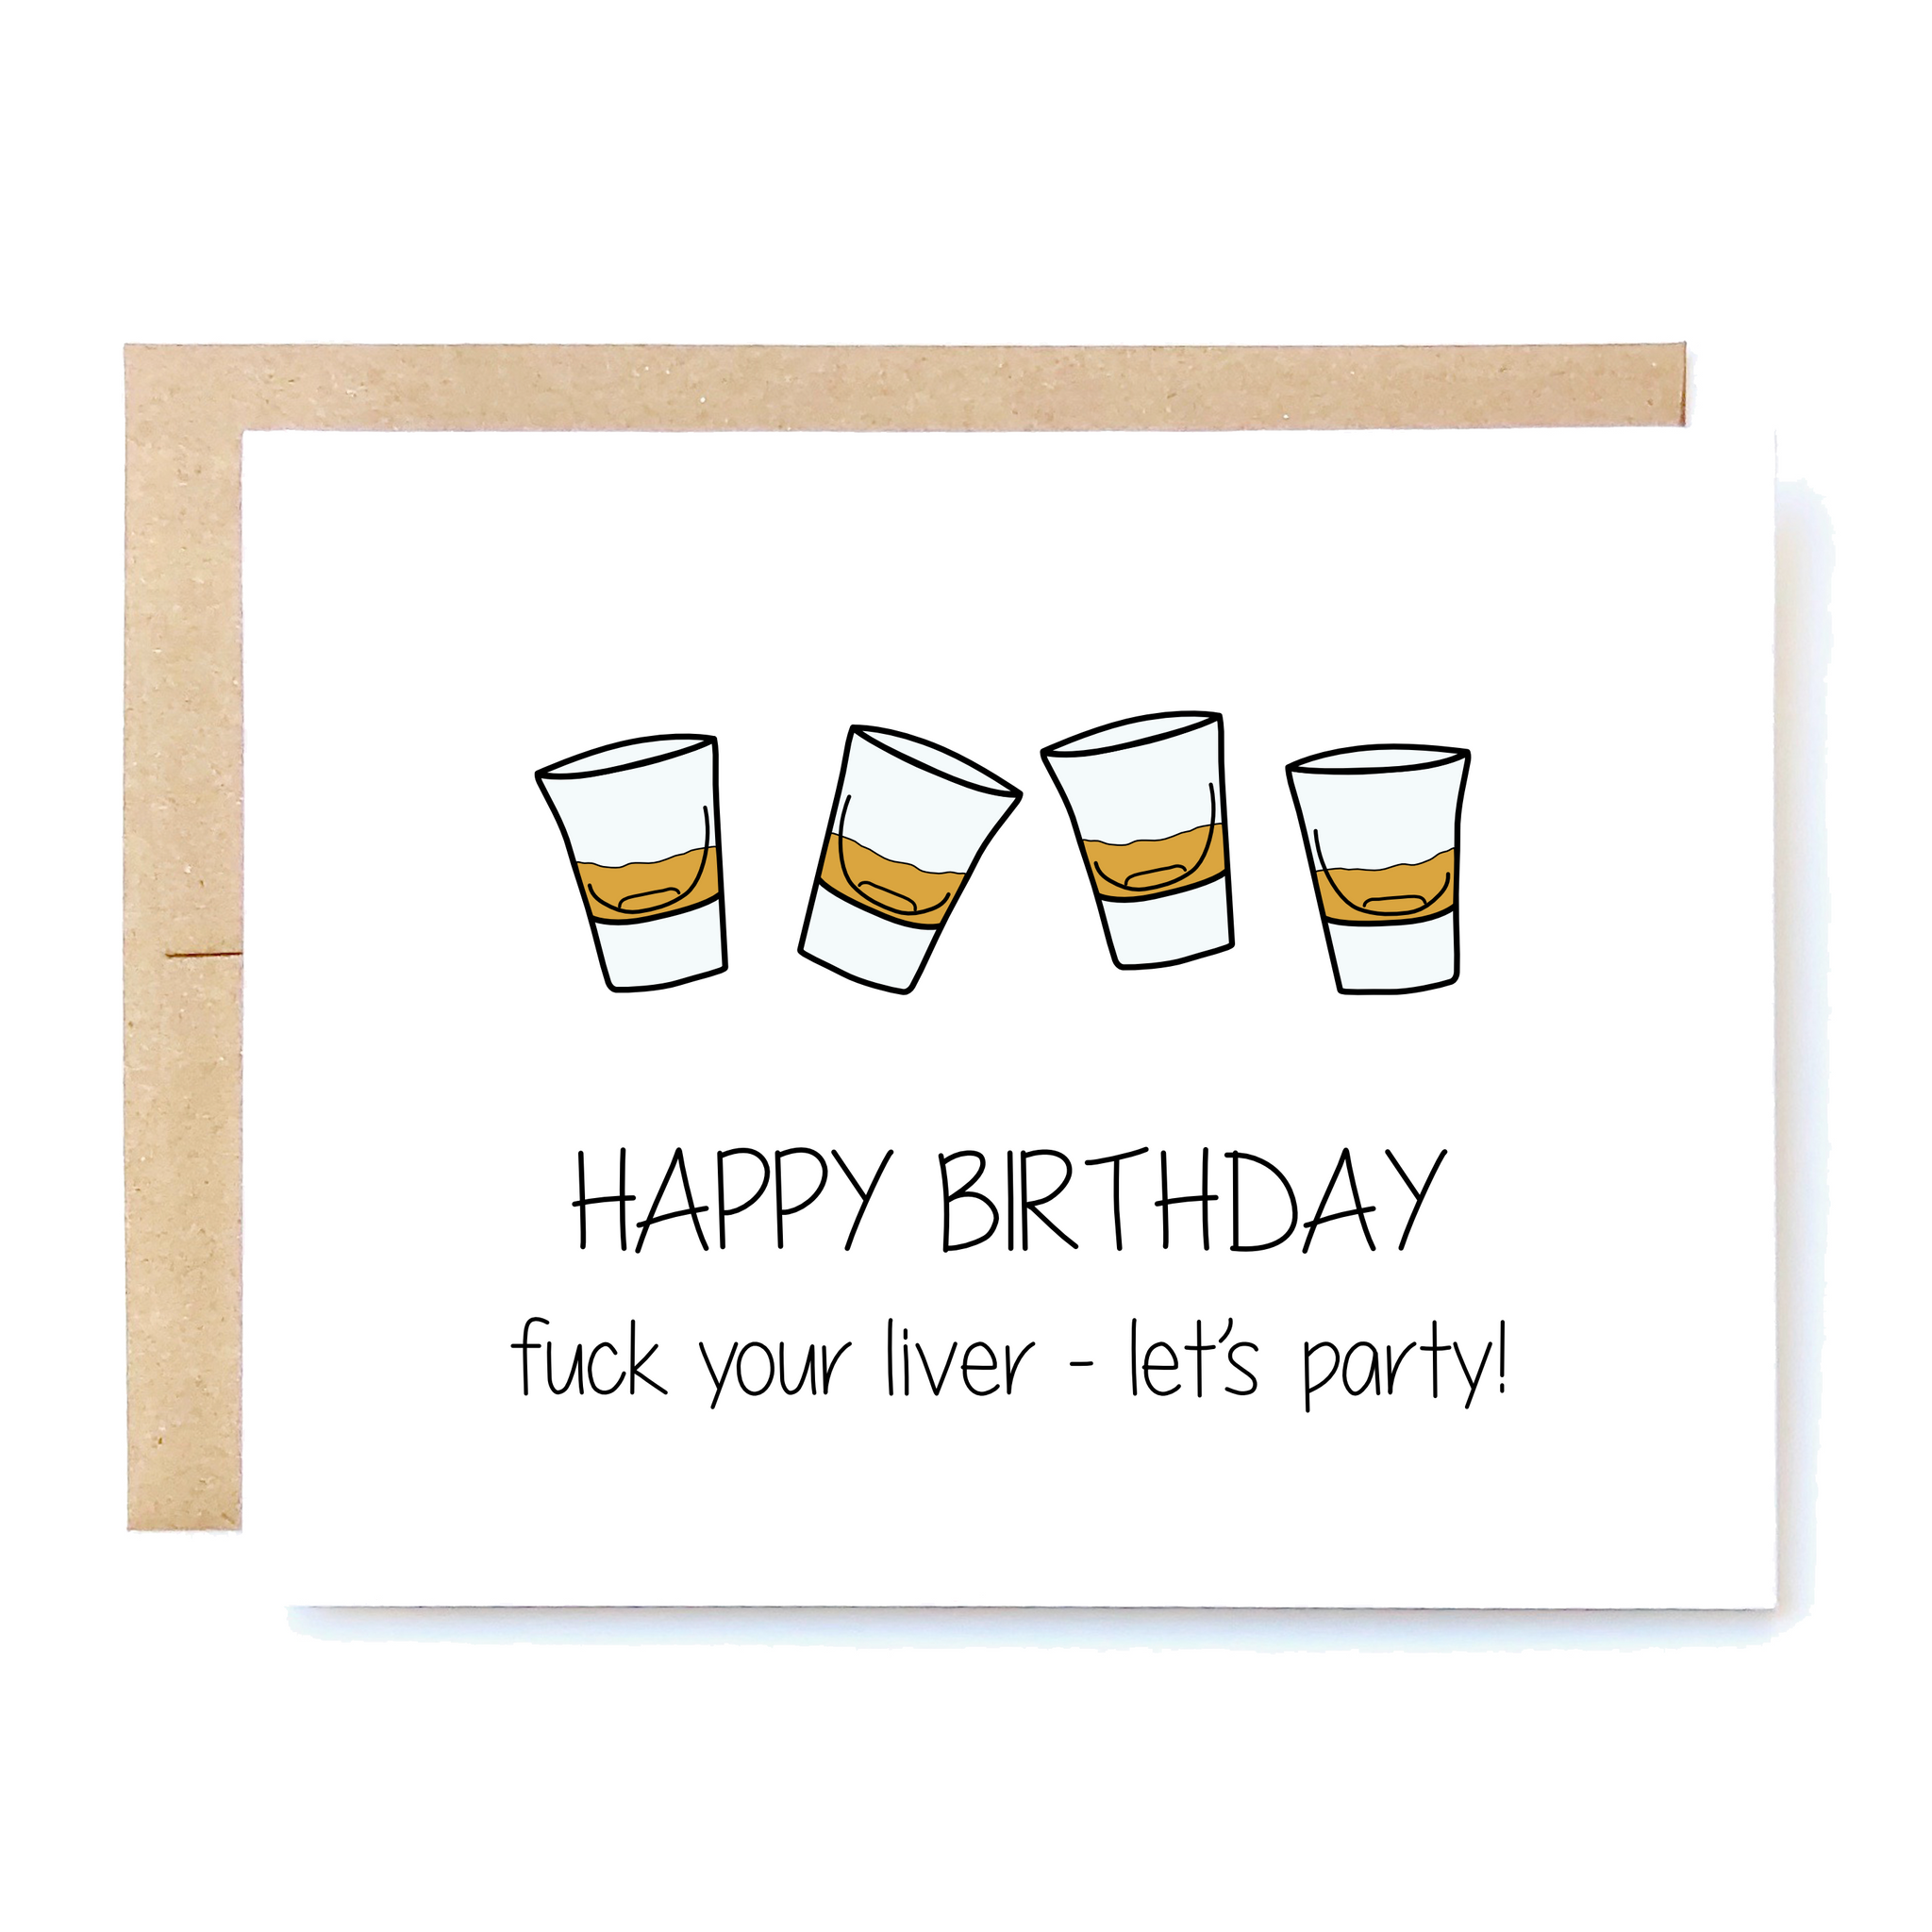 Card Front: F*ck your liver. Let's party.